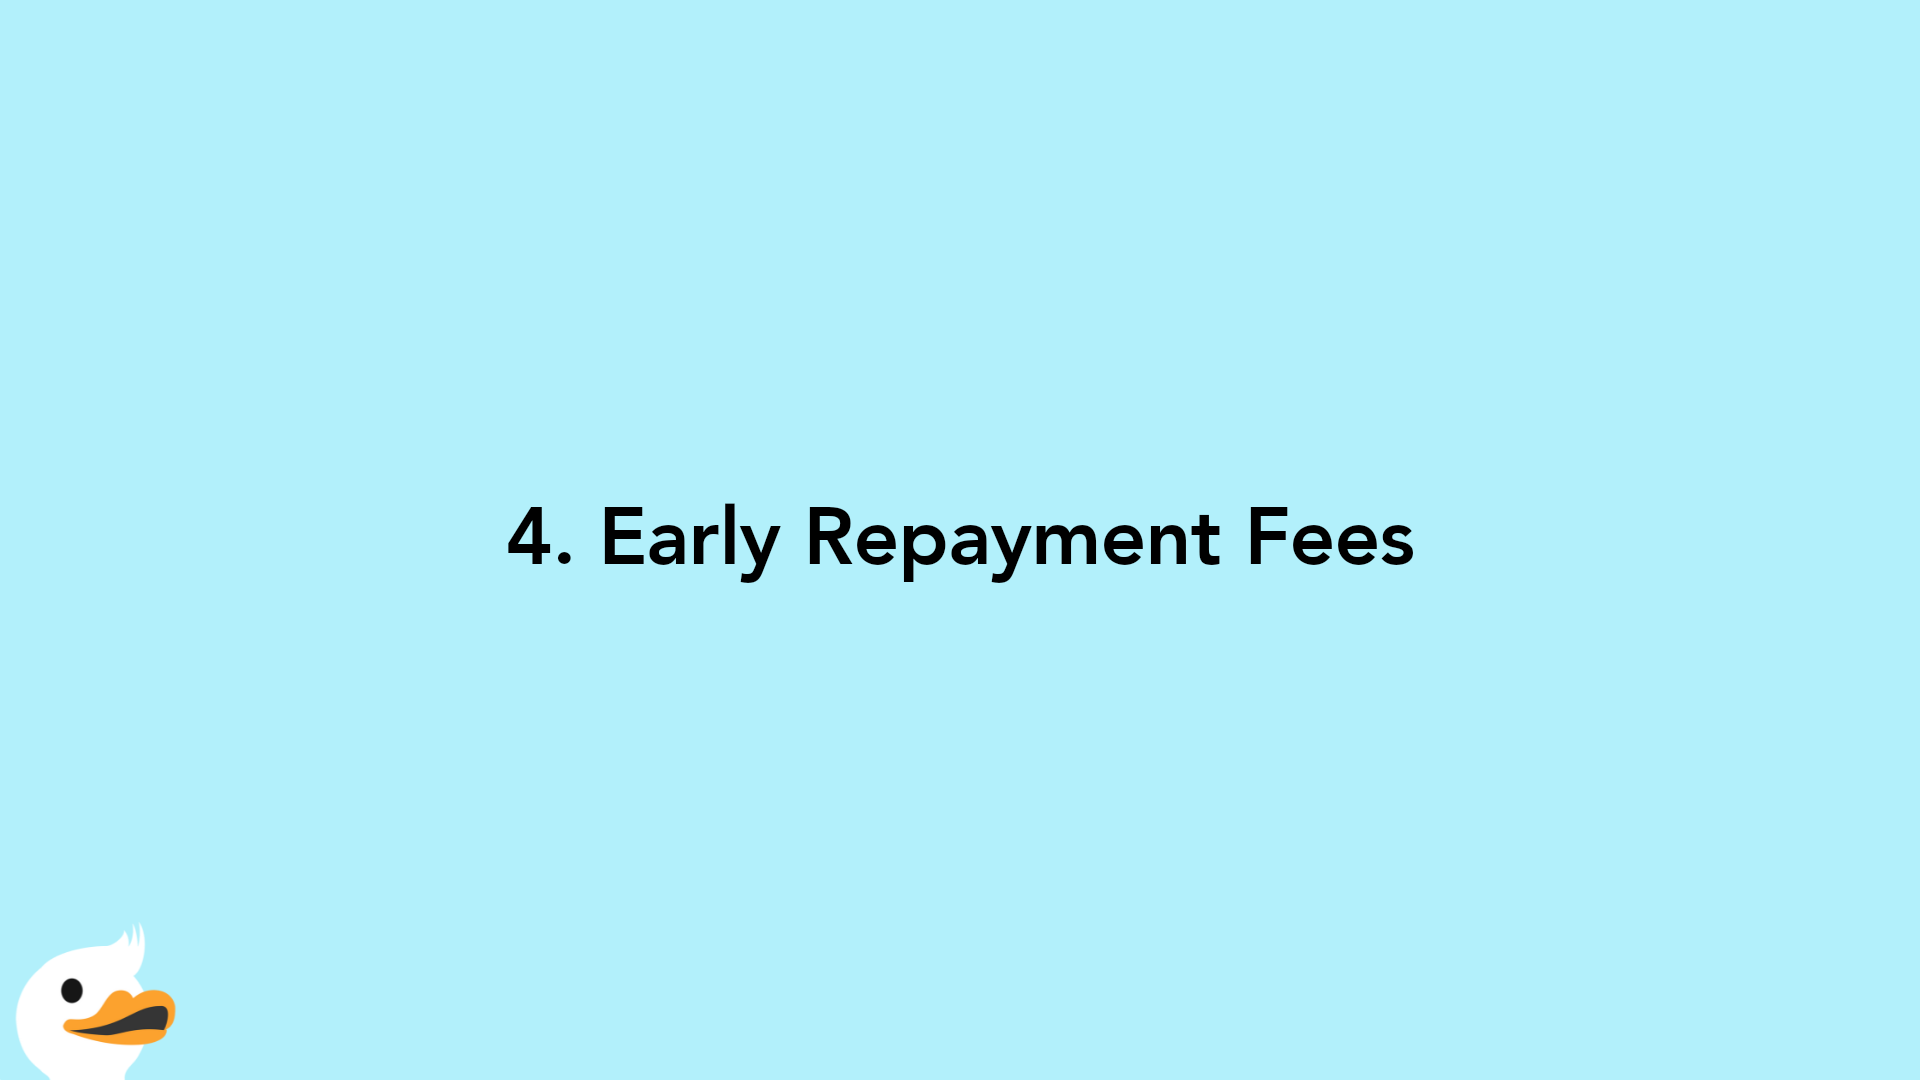 4. Early Repayment Fees